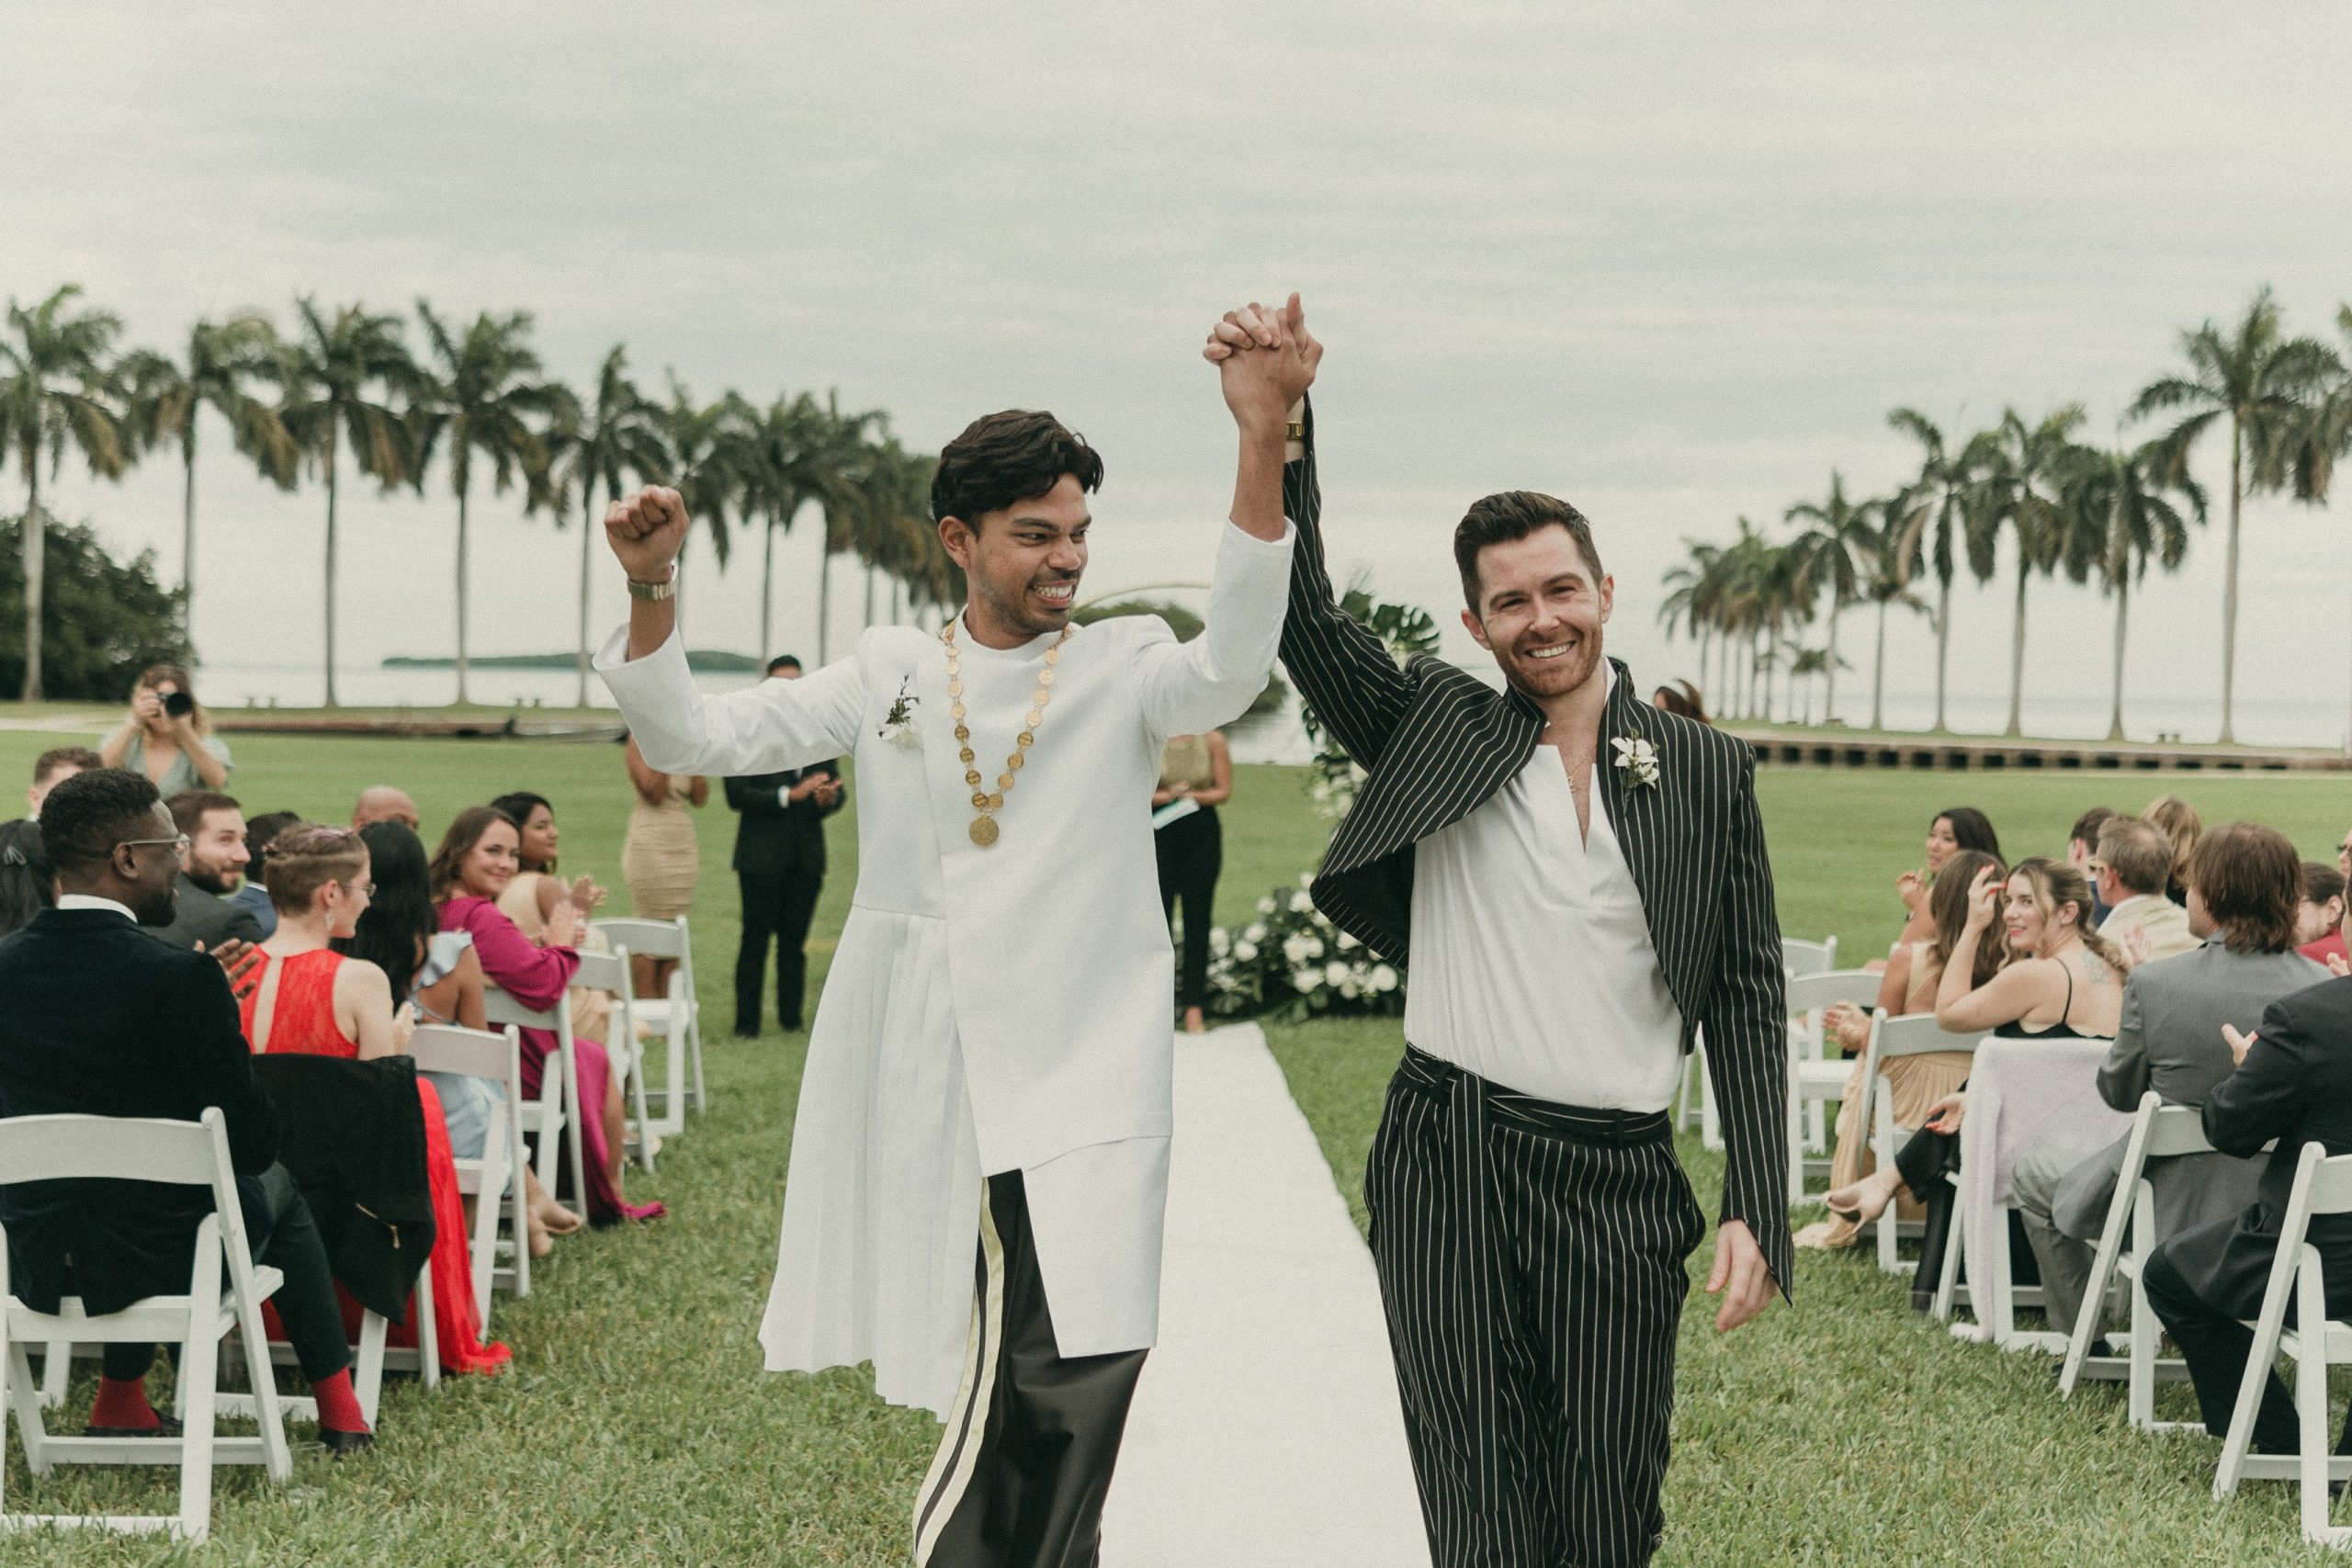 Grooms cheering at the end of their waterfront wedding ceremony